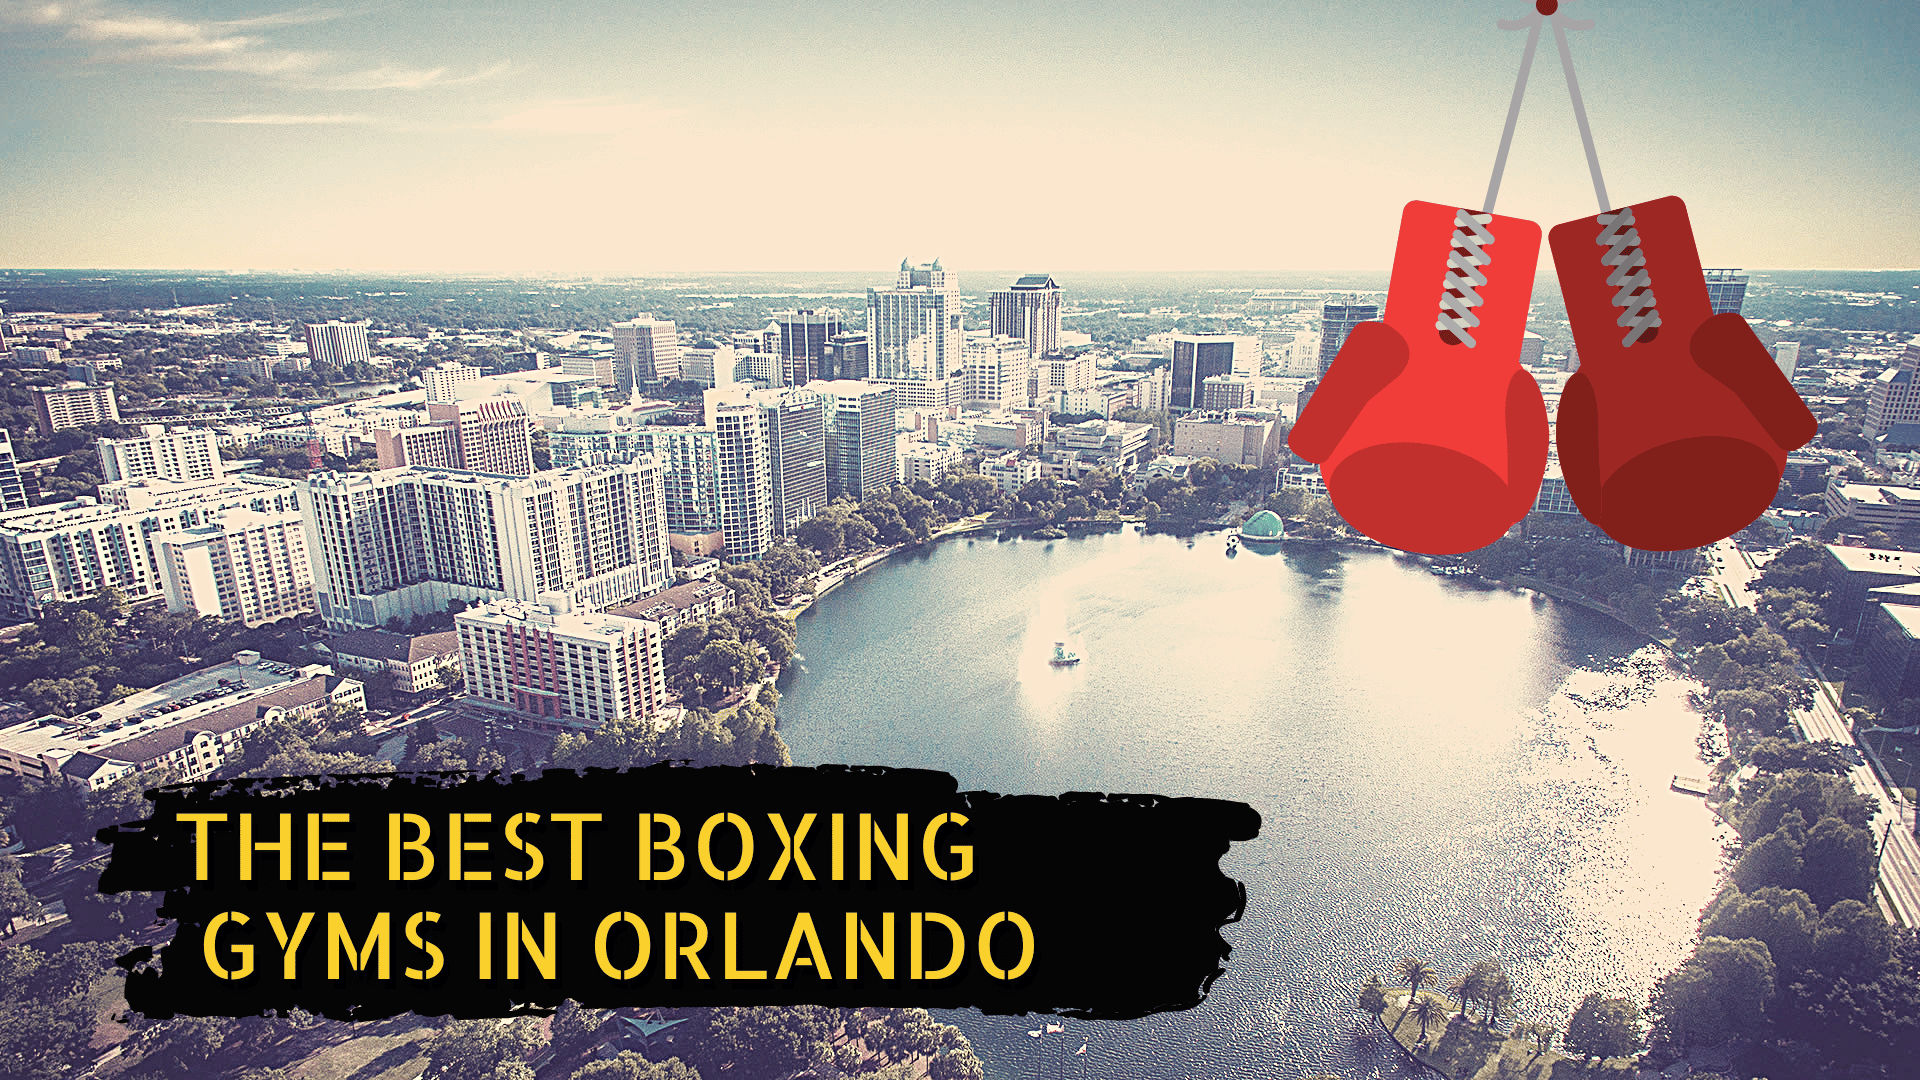 A skyline or Orlando and some boxing gloves with the title "the best boxing gyms in orlando"